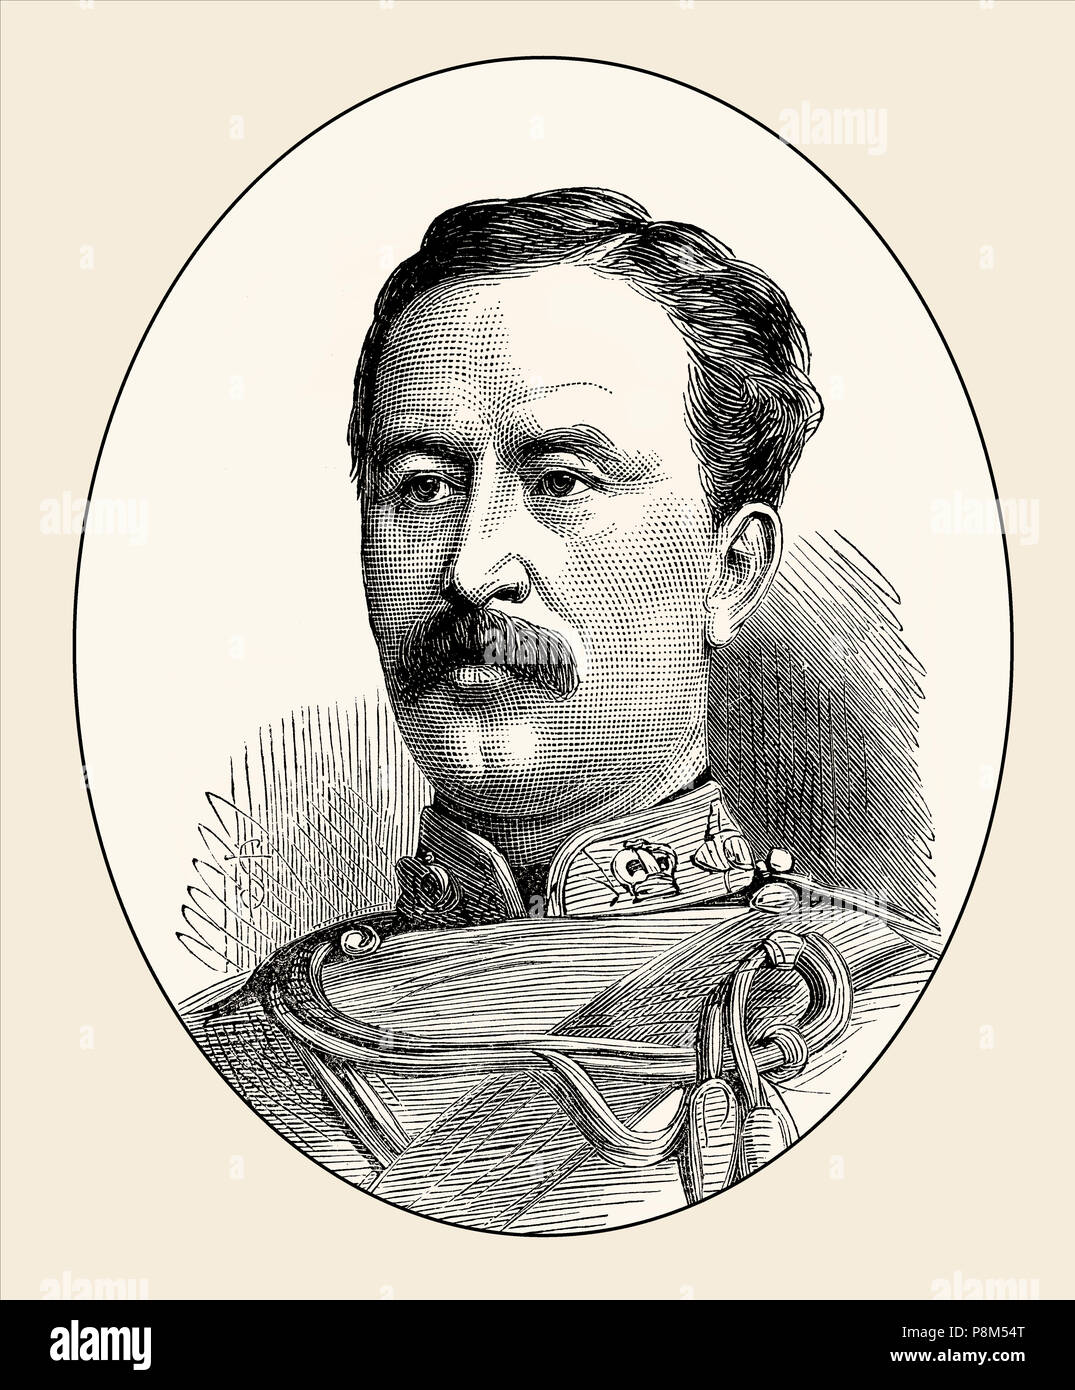 Captain The Hon. E. V. Wyatt Edgell, killed at the Battle of Ulundi on 4 July 1879, From British Battles on Land and Sea, by James Grant Stock Photo